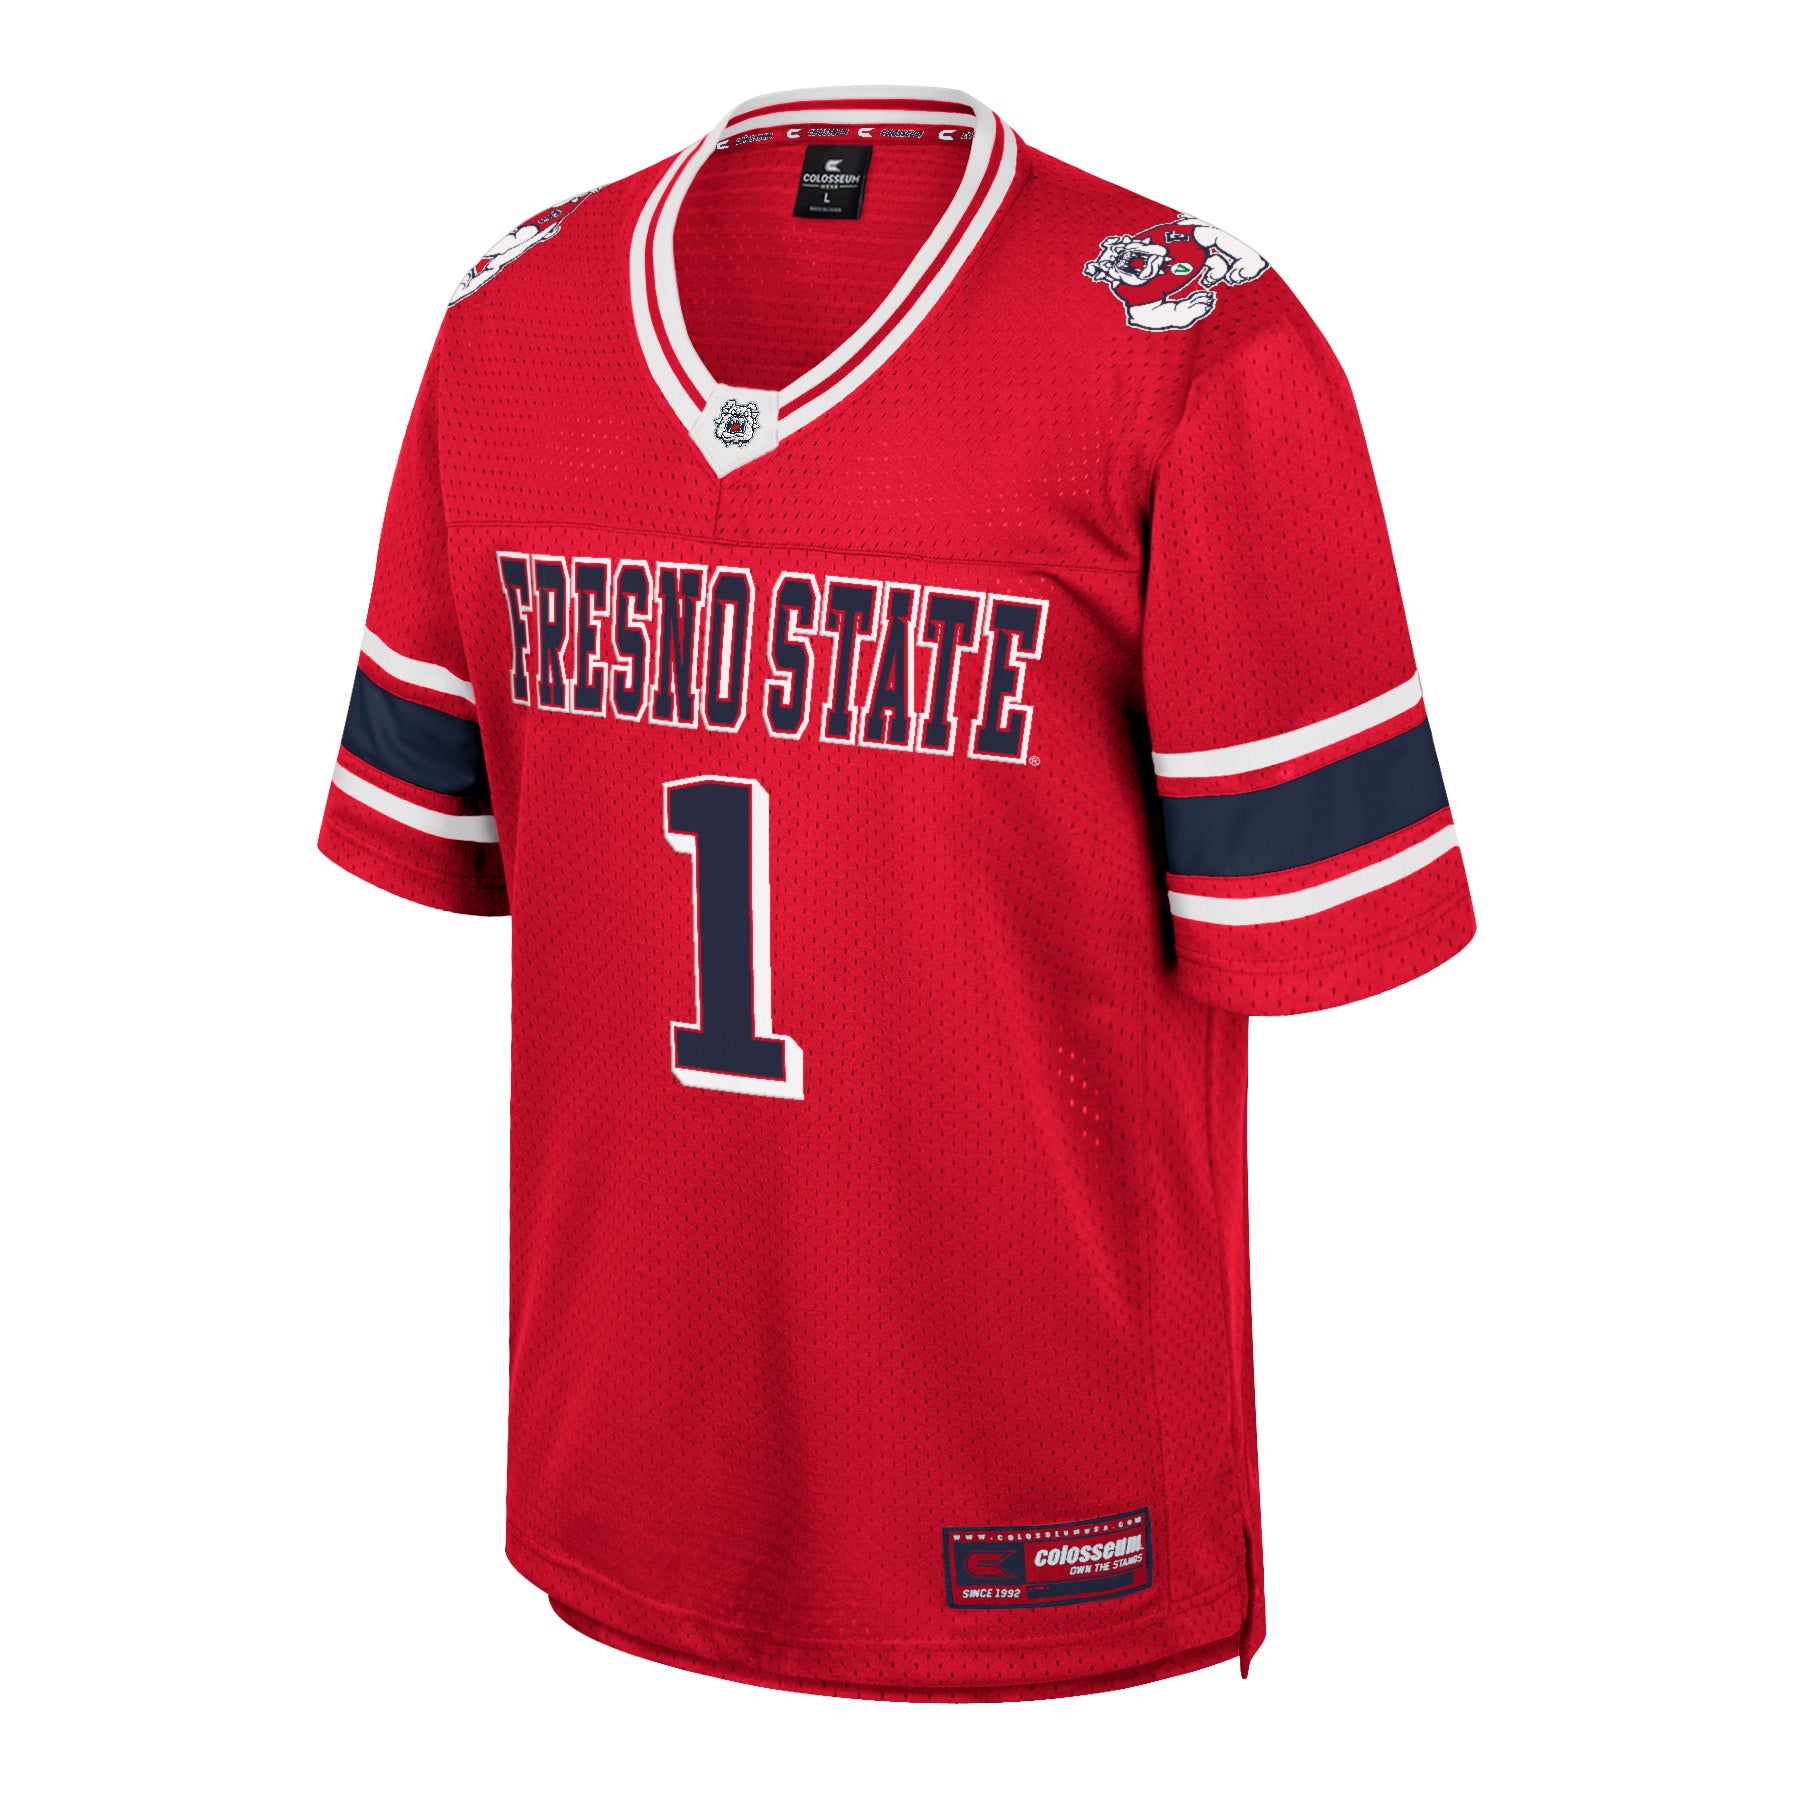 FRESNO STATE BULLDOGS YOUTH NO FATE FOOTBALL JERSEY - 23 RED